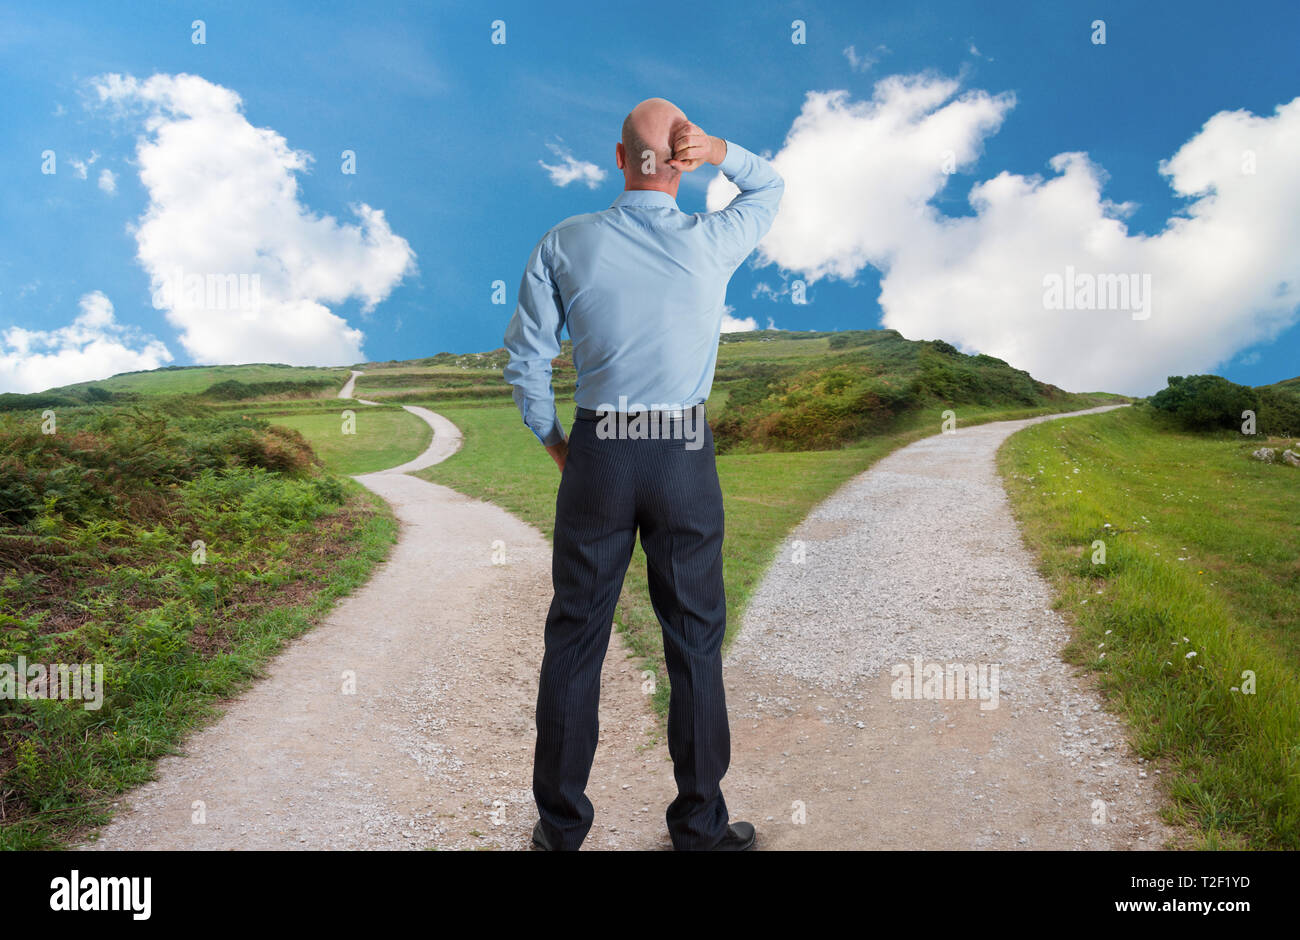 man at fork in the road concept image Stock Photo